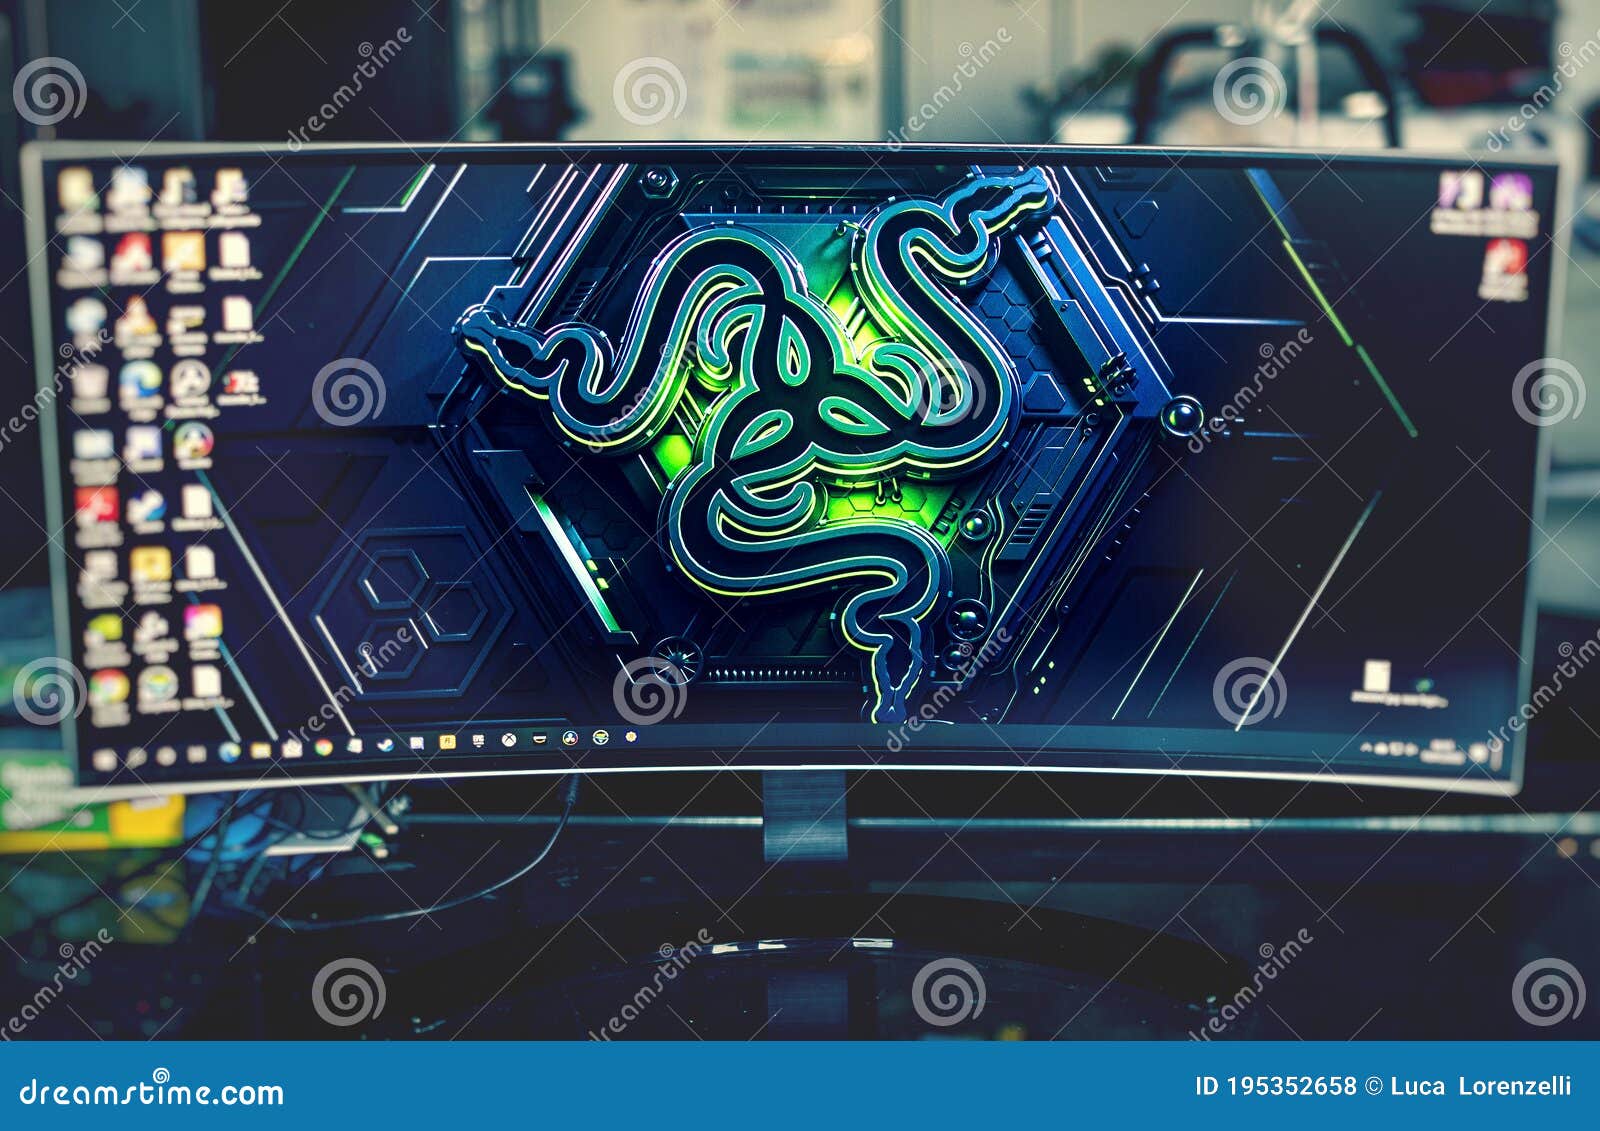 Pc Gaming Concept An Ultrawide Screen With The Razer Logo On As Windows Wallpaper Razer Is A Company That Make Pro Editorial Stock Photo Image Of Symbol Player